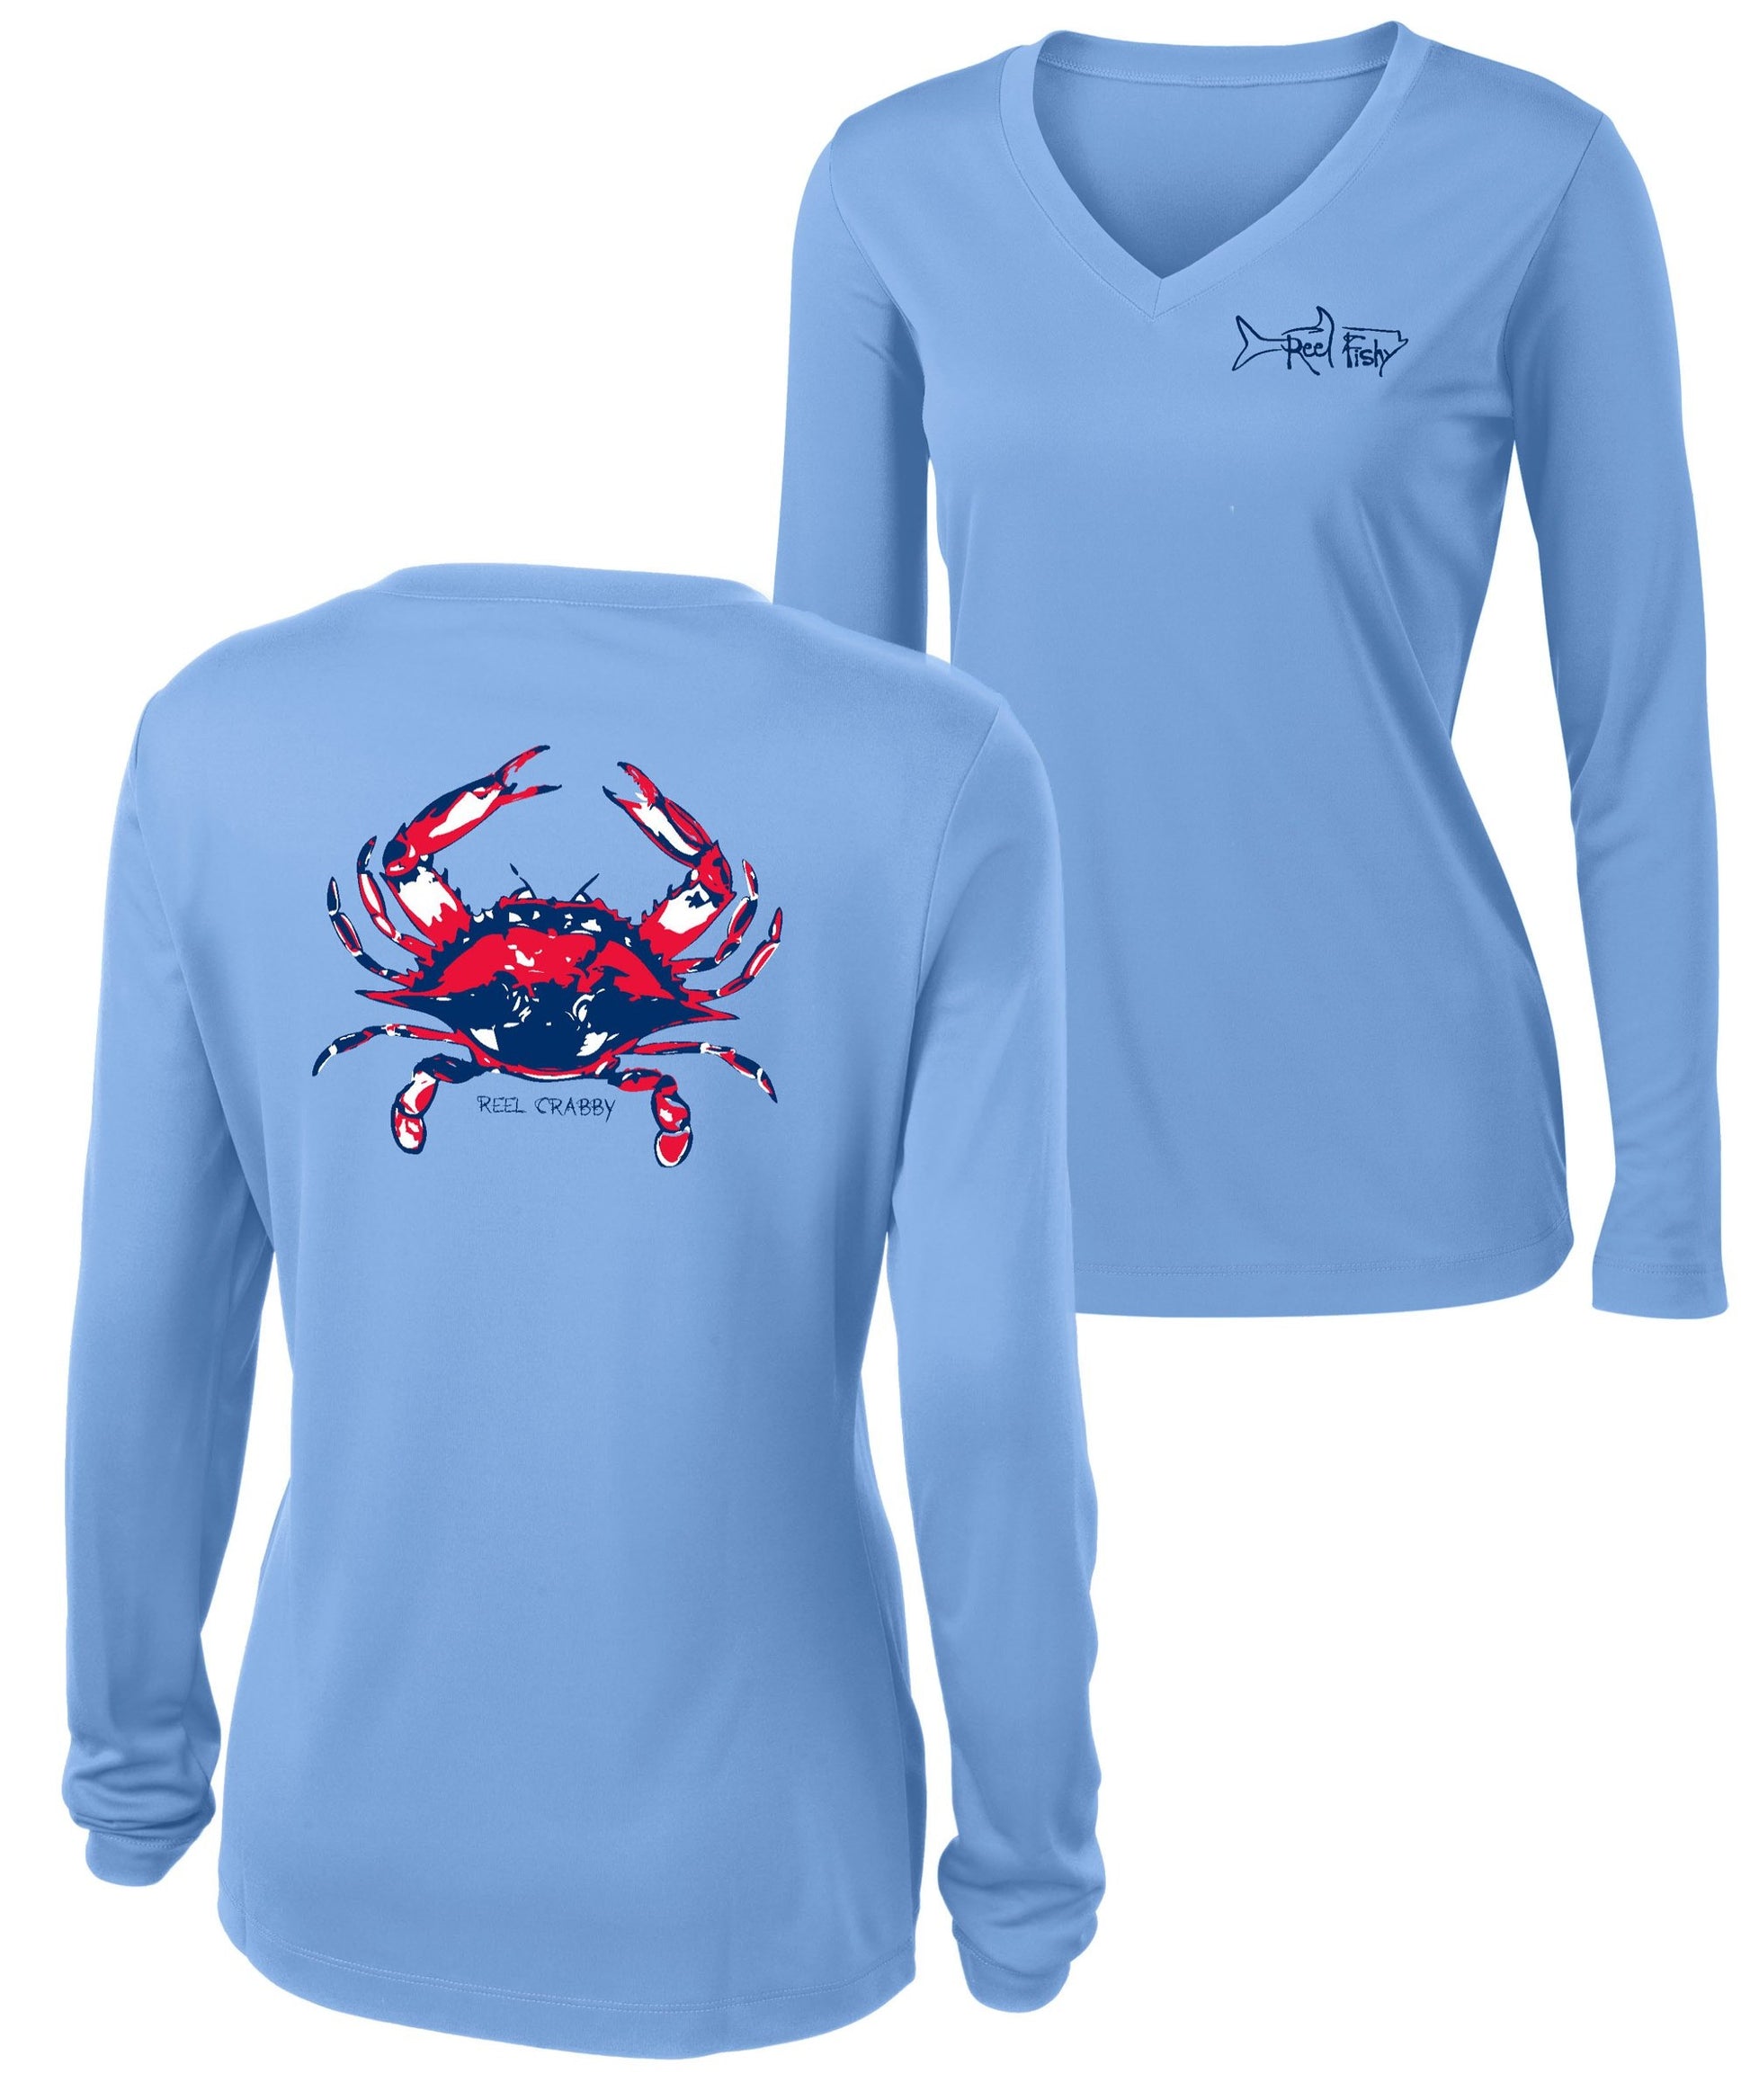 American Blue Crab -Reel Crabby Ladies Performance Dry-fit V-neck Long Sleeve Shirt with 50+ UV Sun Protection in Light Blue